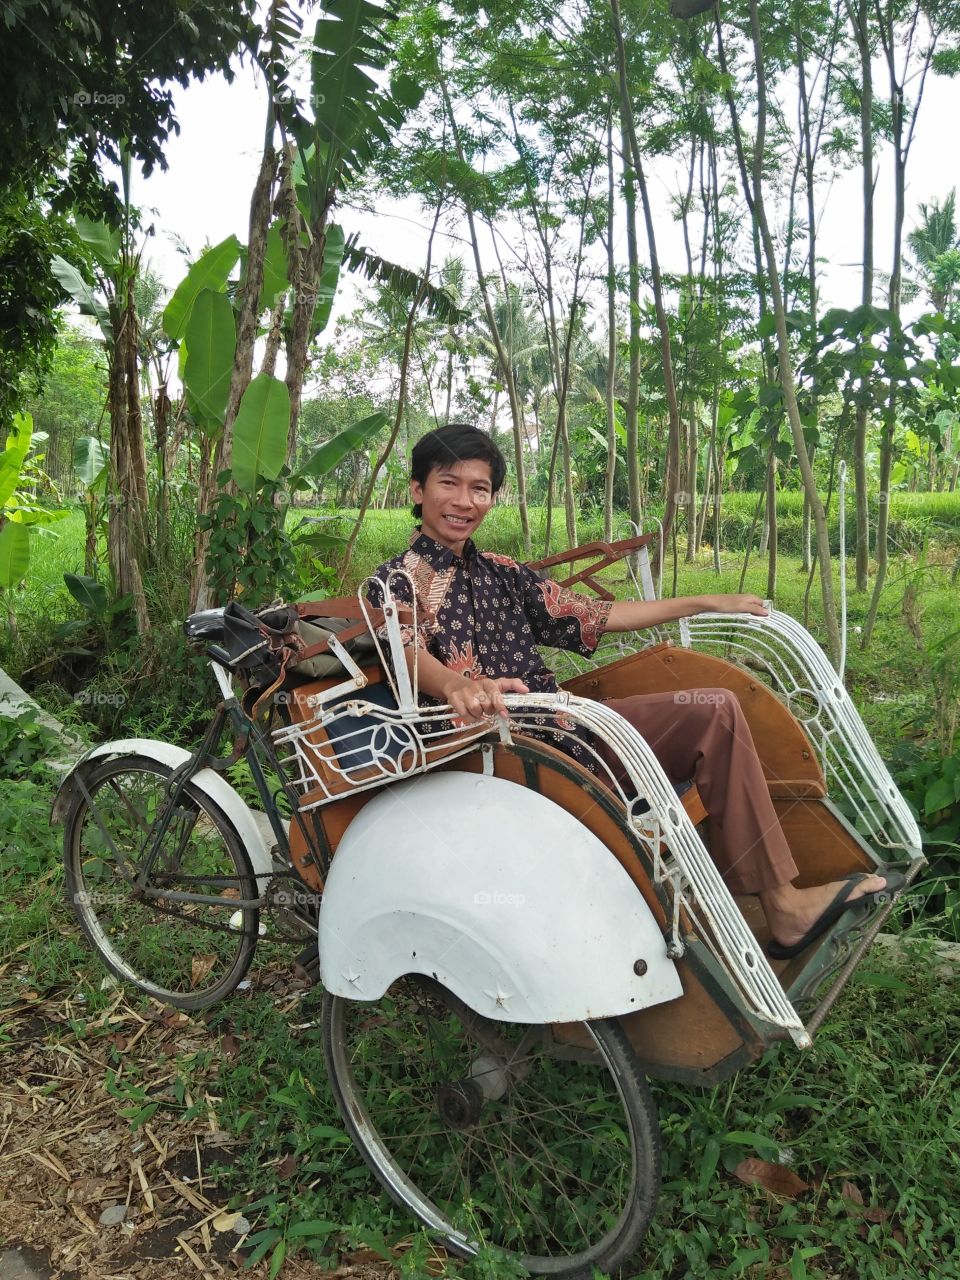 this is a traditional pedicab transportation , and do not forget to smile